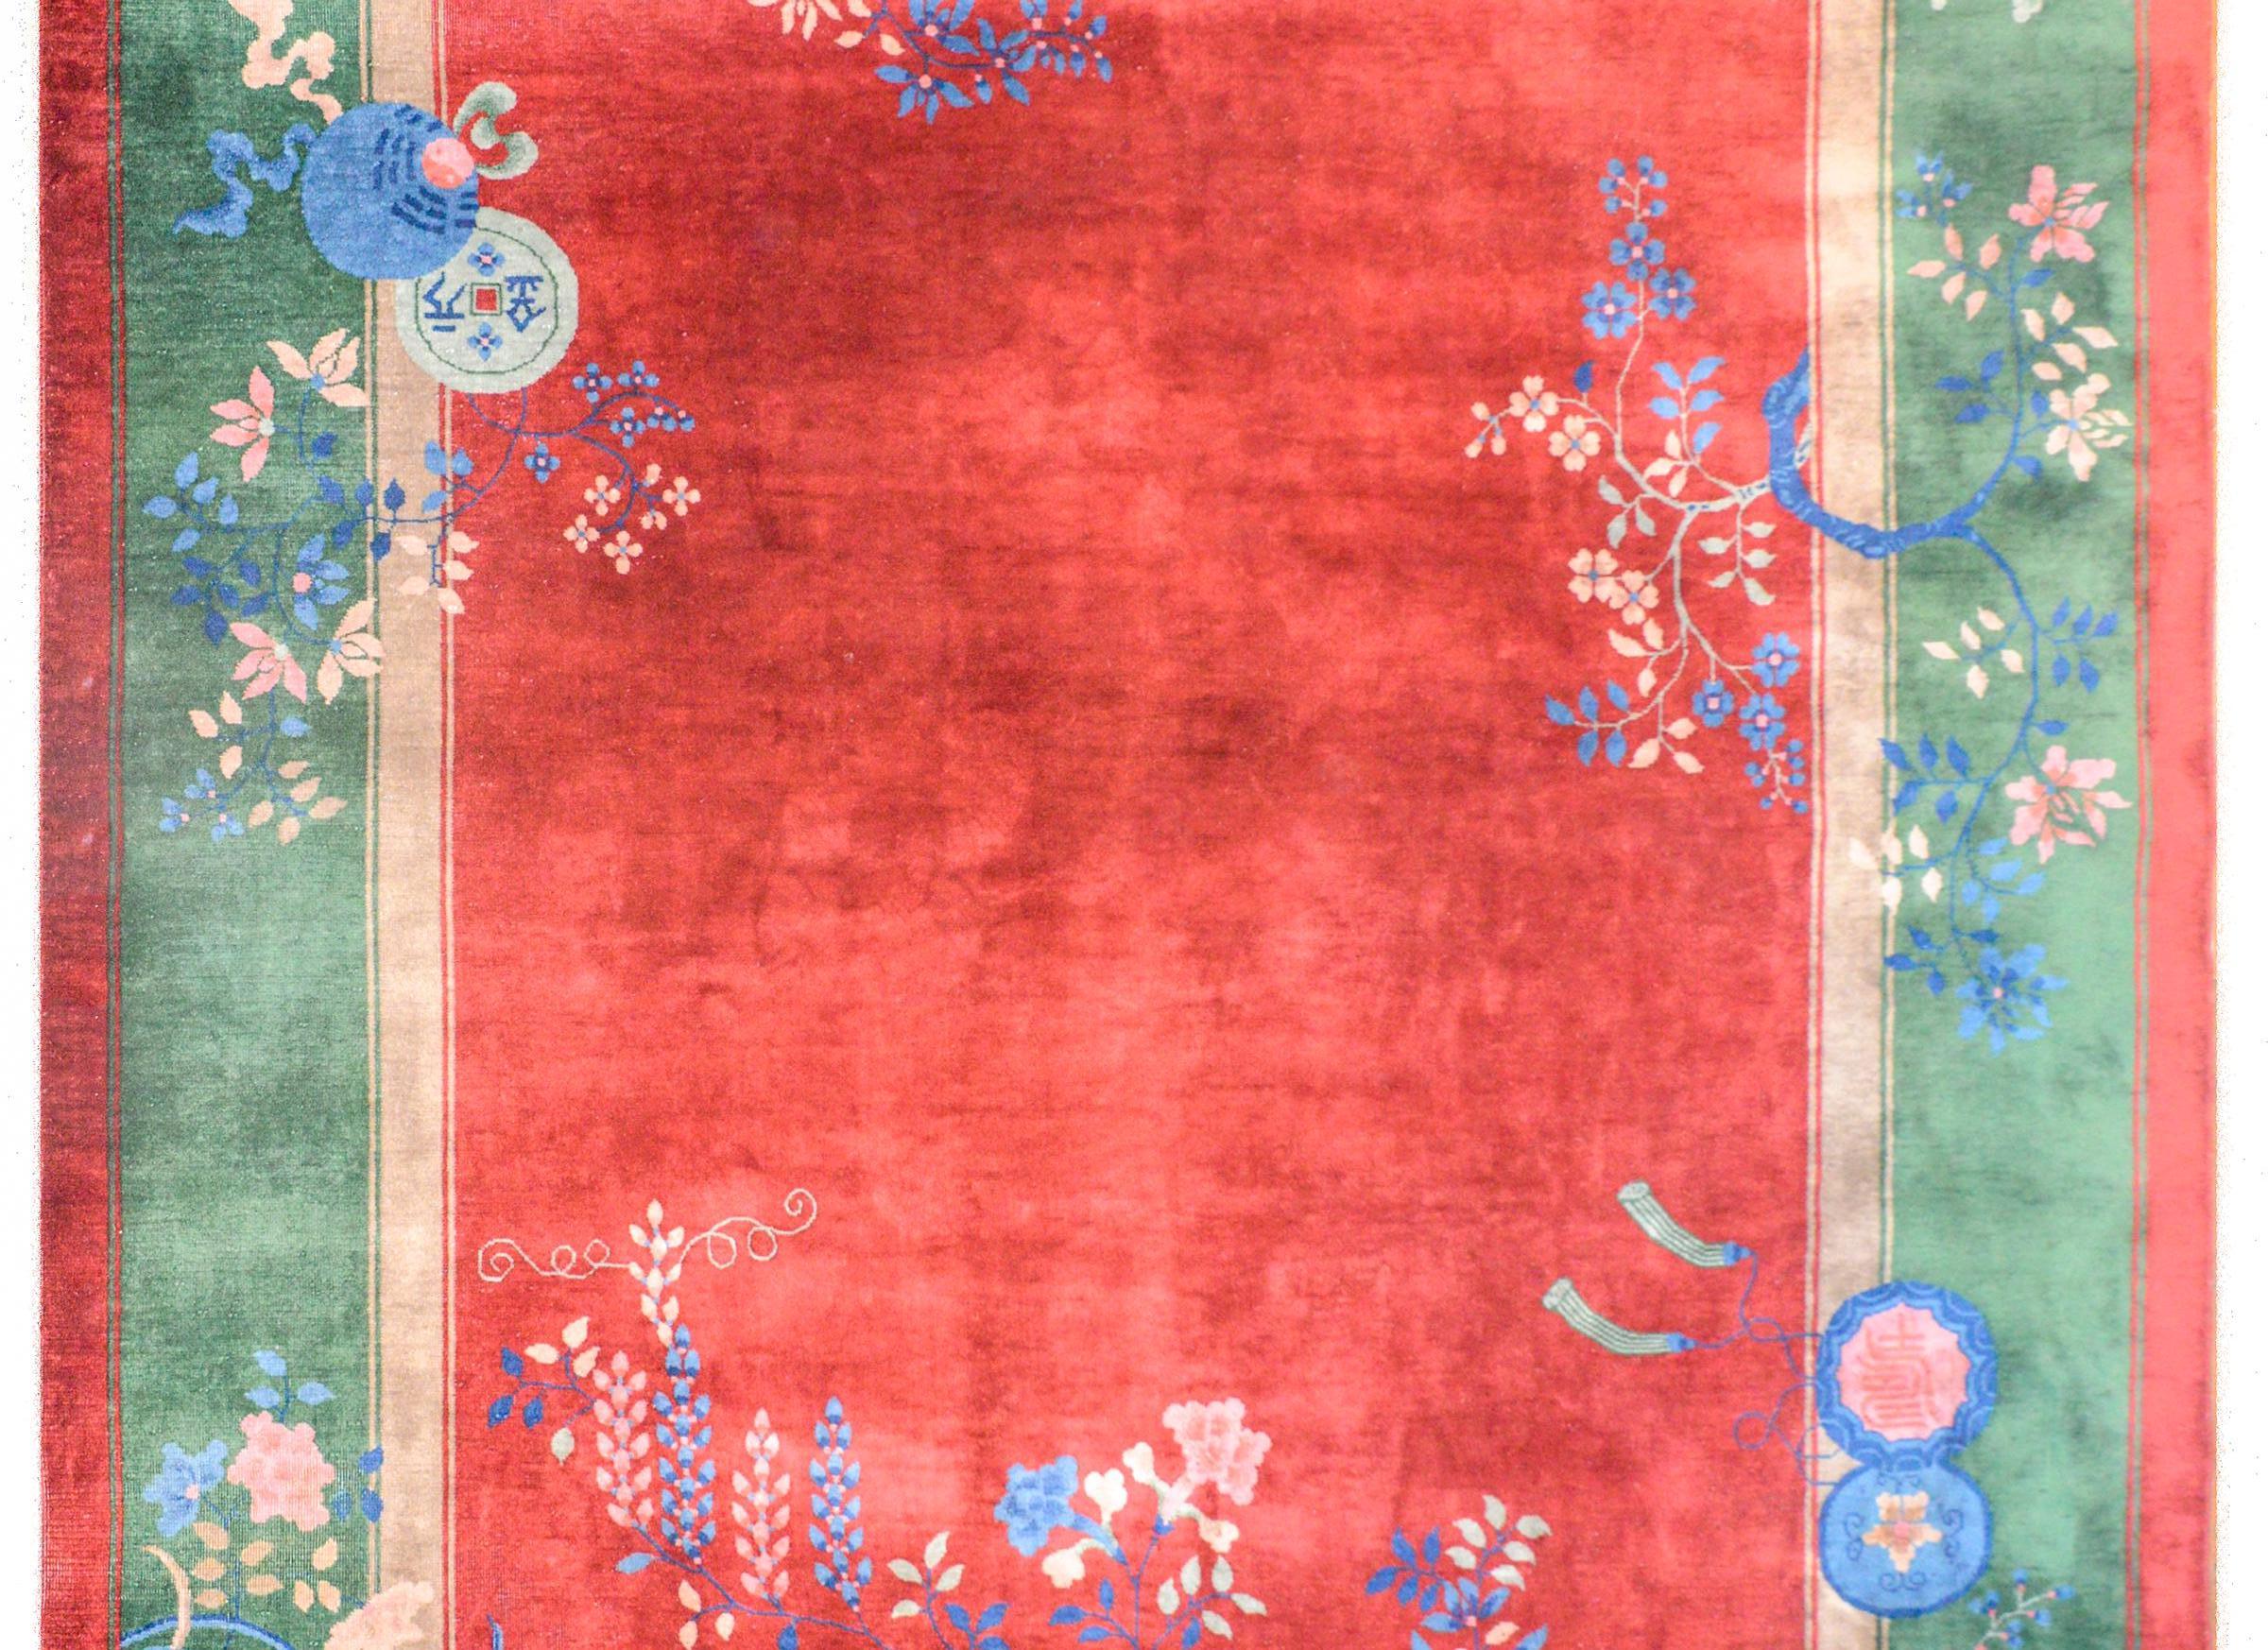 An exquisite early 20th century Chinese Art Deco rug with a rusty orange central field surrounded by a wide sage green border. Myriad auspicious flowers like chrysanthemums, peonies and cherry blossoms are overlying the field, and woven in light and